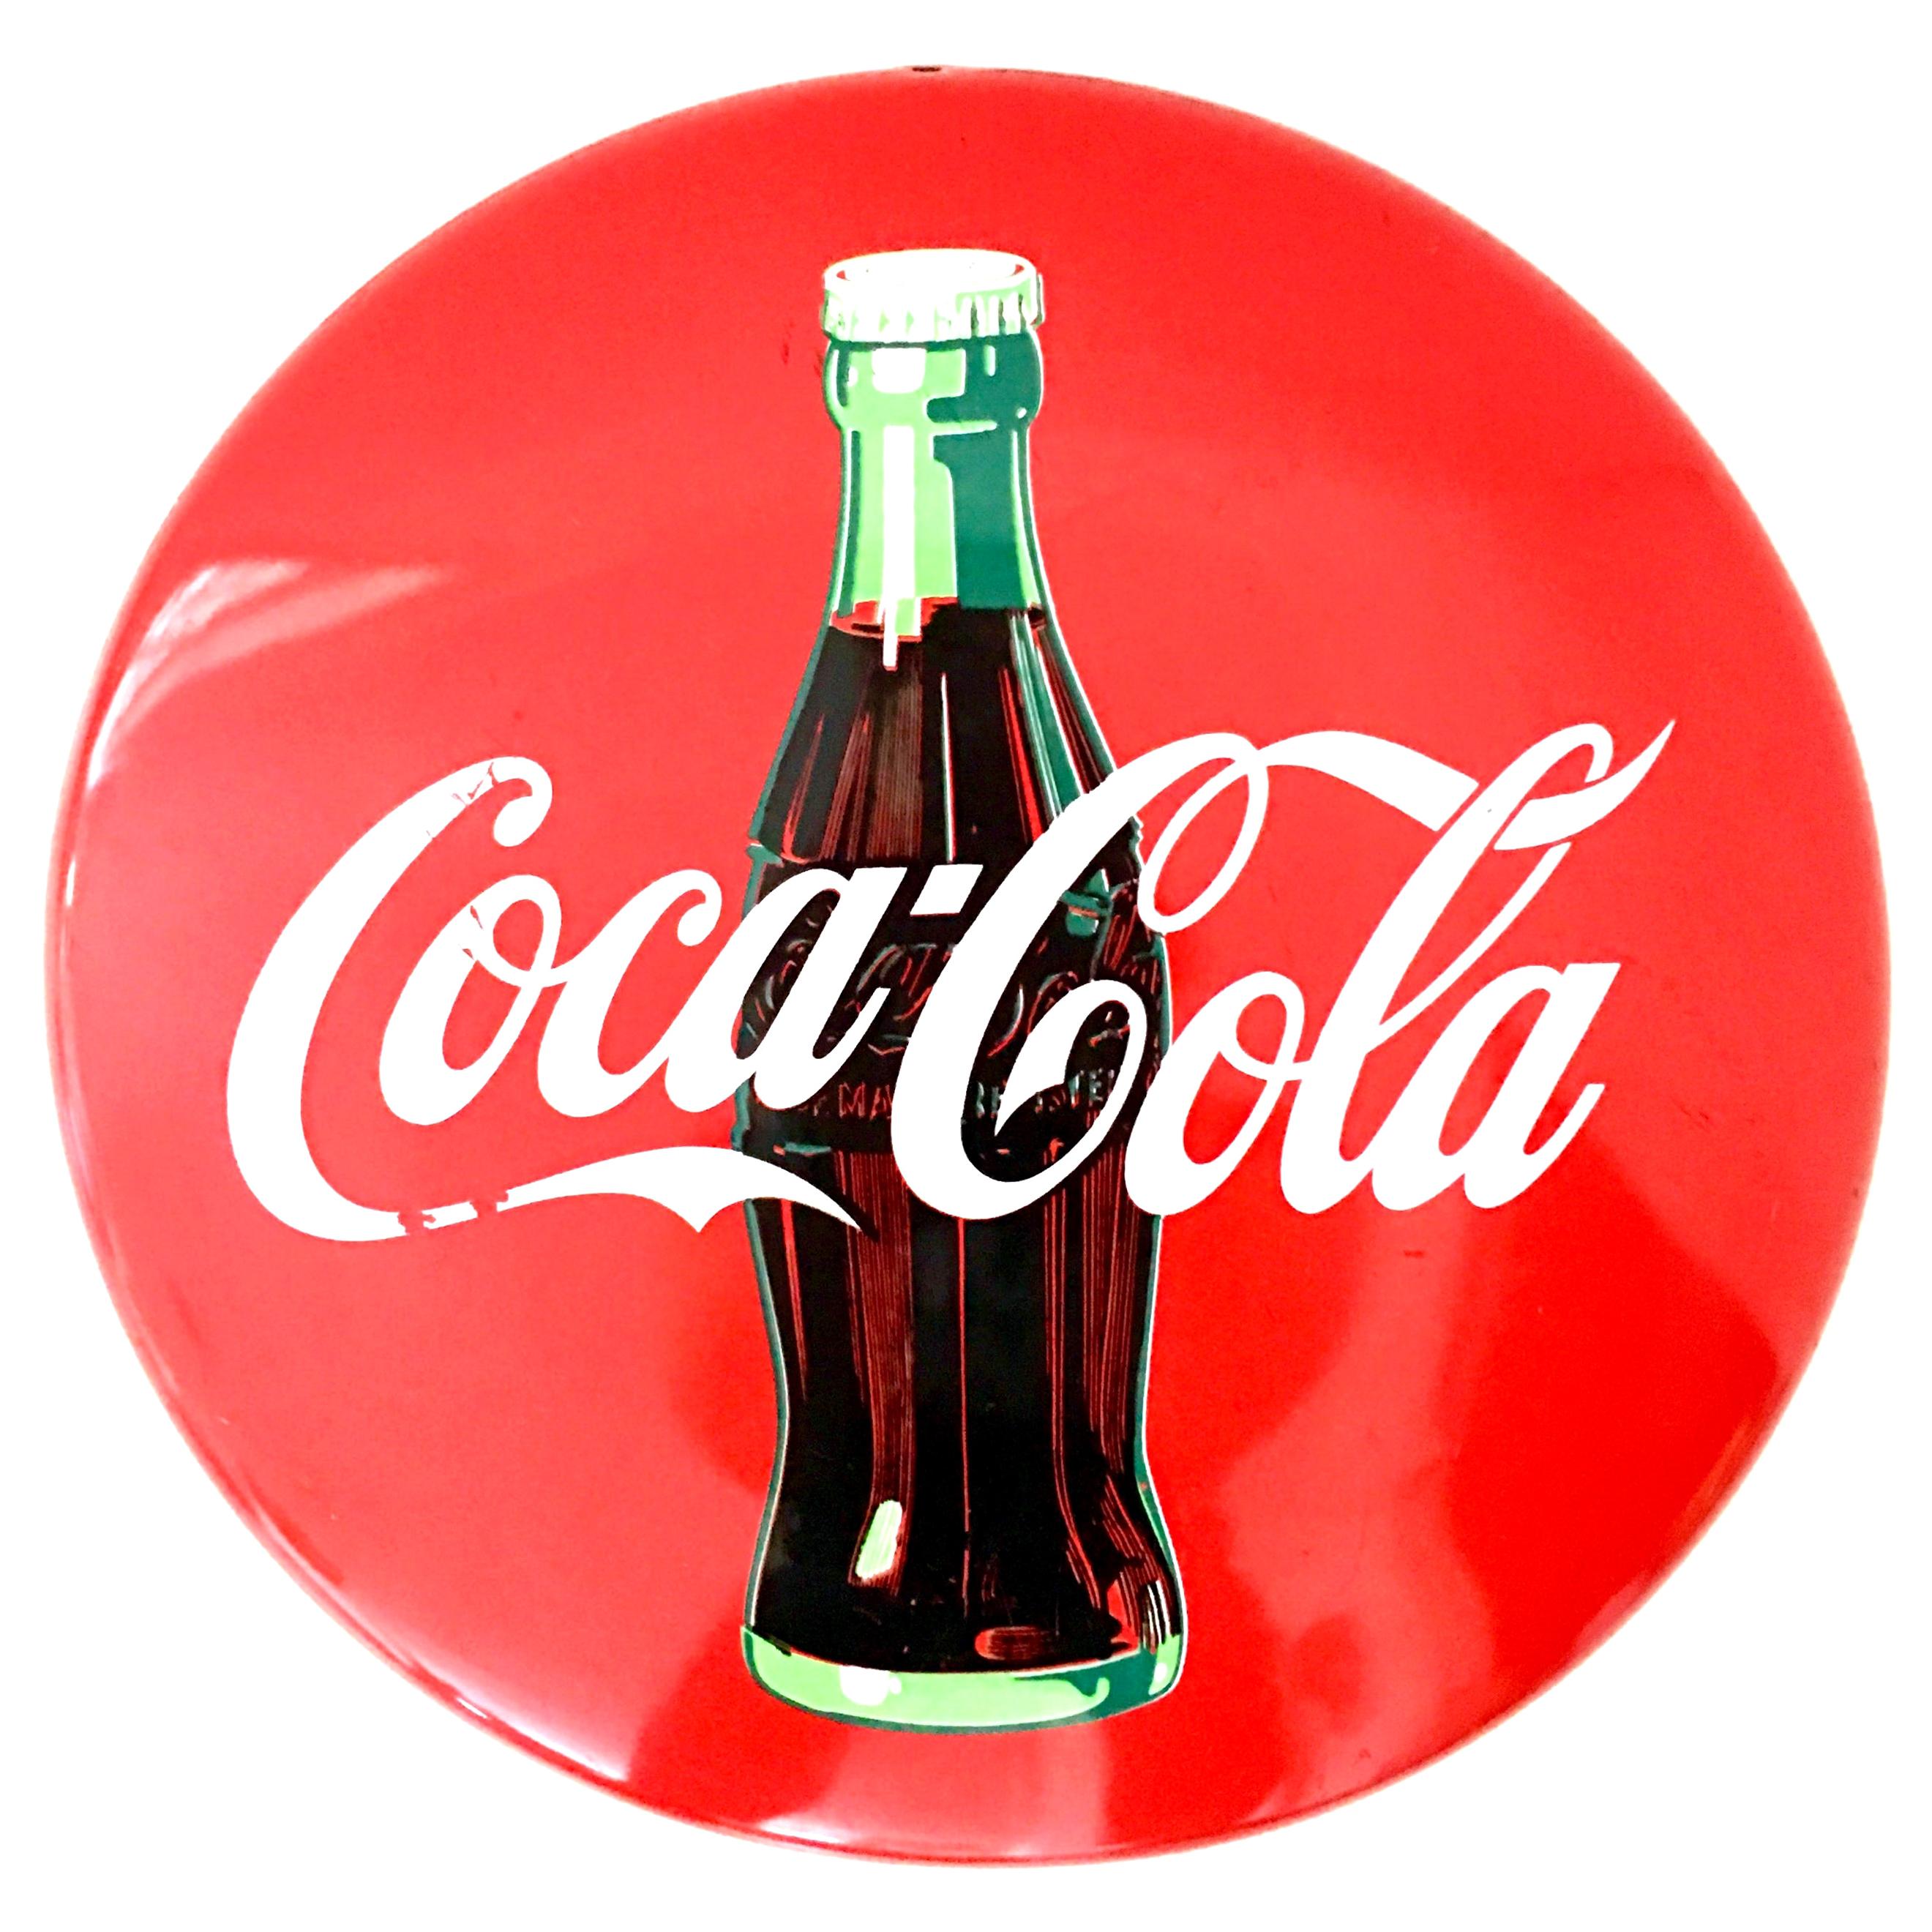 20th Century Coca-Cola Enamel Iron Button and Bottle Advertising Sign-Signed